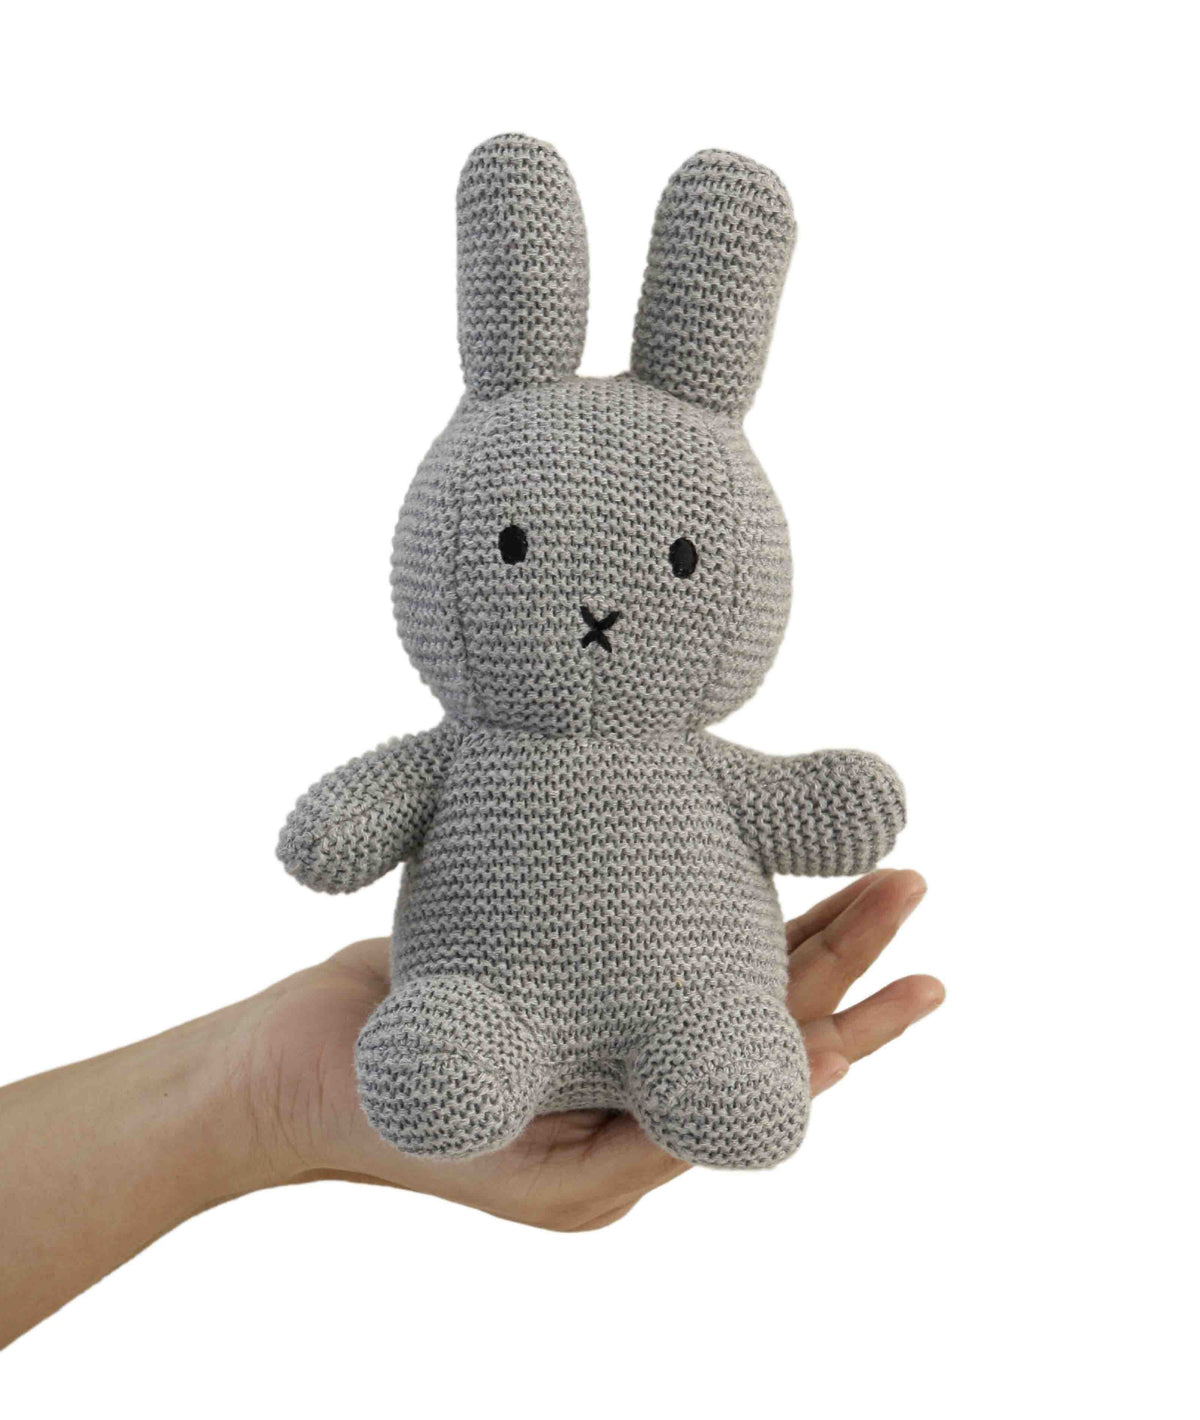 Bobby Bunny Grey 100% Cotton Knitted Stuffed Soft Toy for Babies / Kids